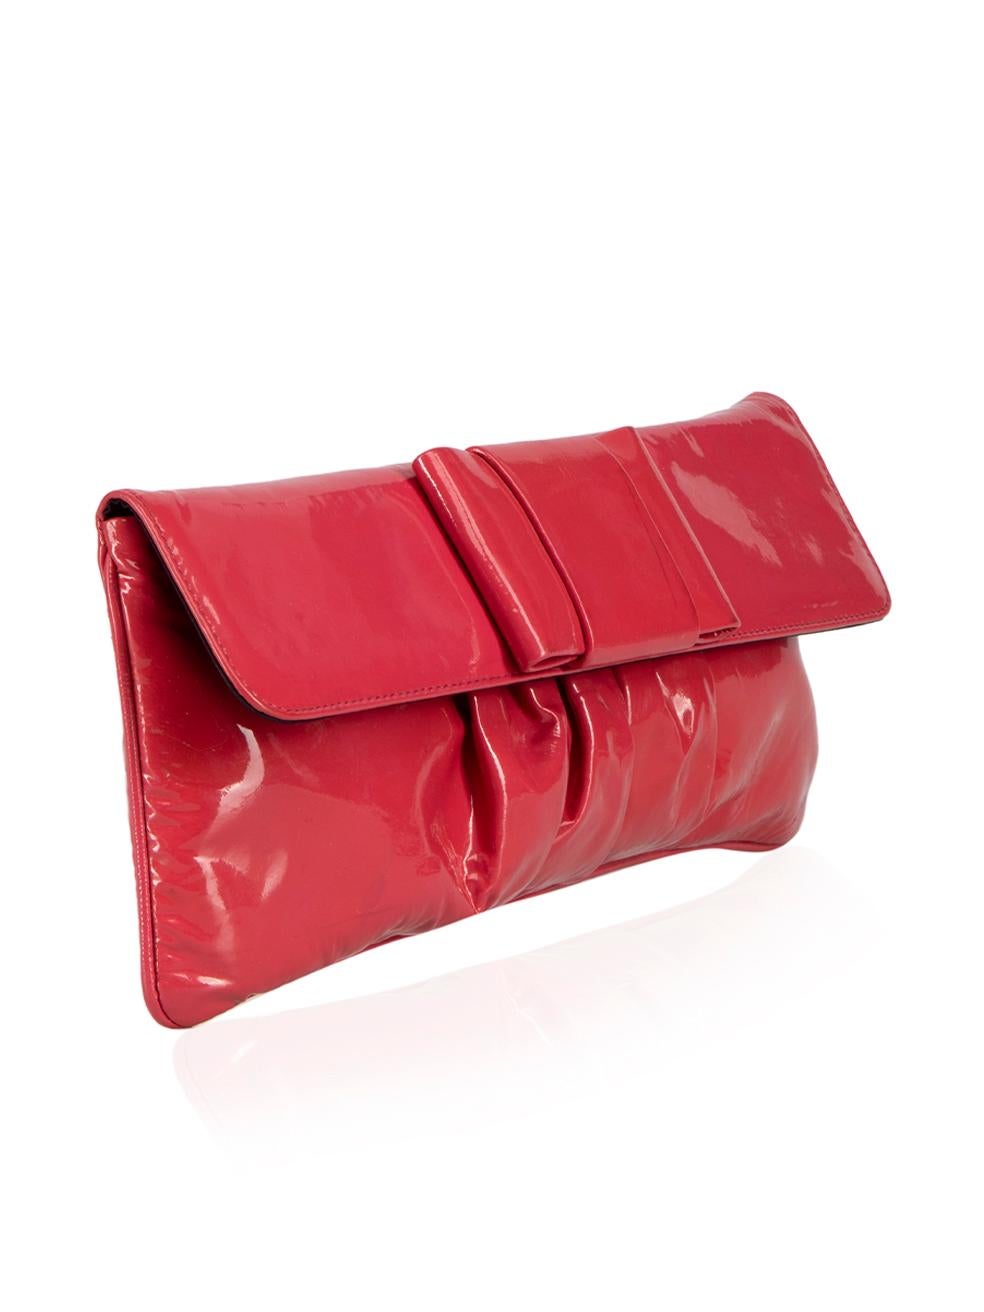 CONDITION is Good. General wear to bag is evident. Moderate signs of wear to exterior with a number of discoloured marks seen at the front and back of this used Miu Miu designer resale item.
 
Details
Pink
Patent leather
Medium long clutch
Bow